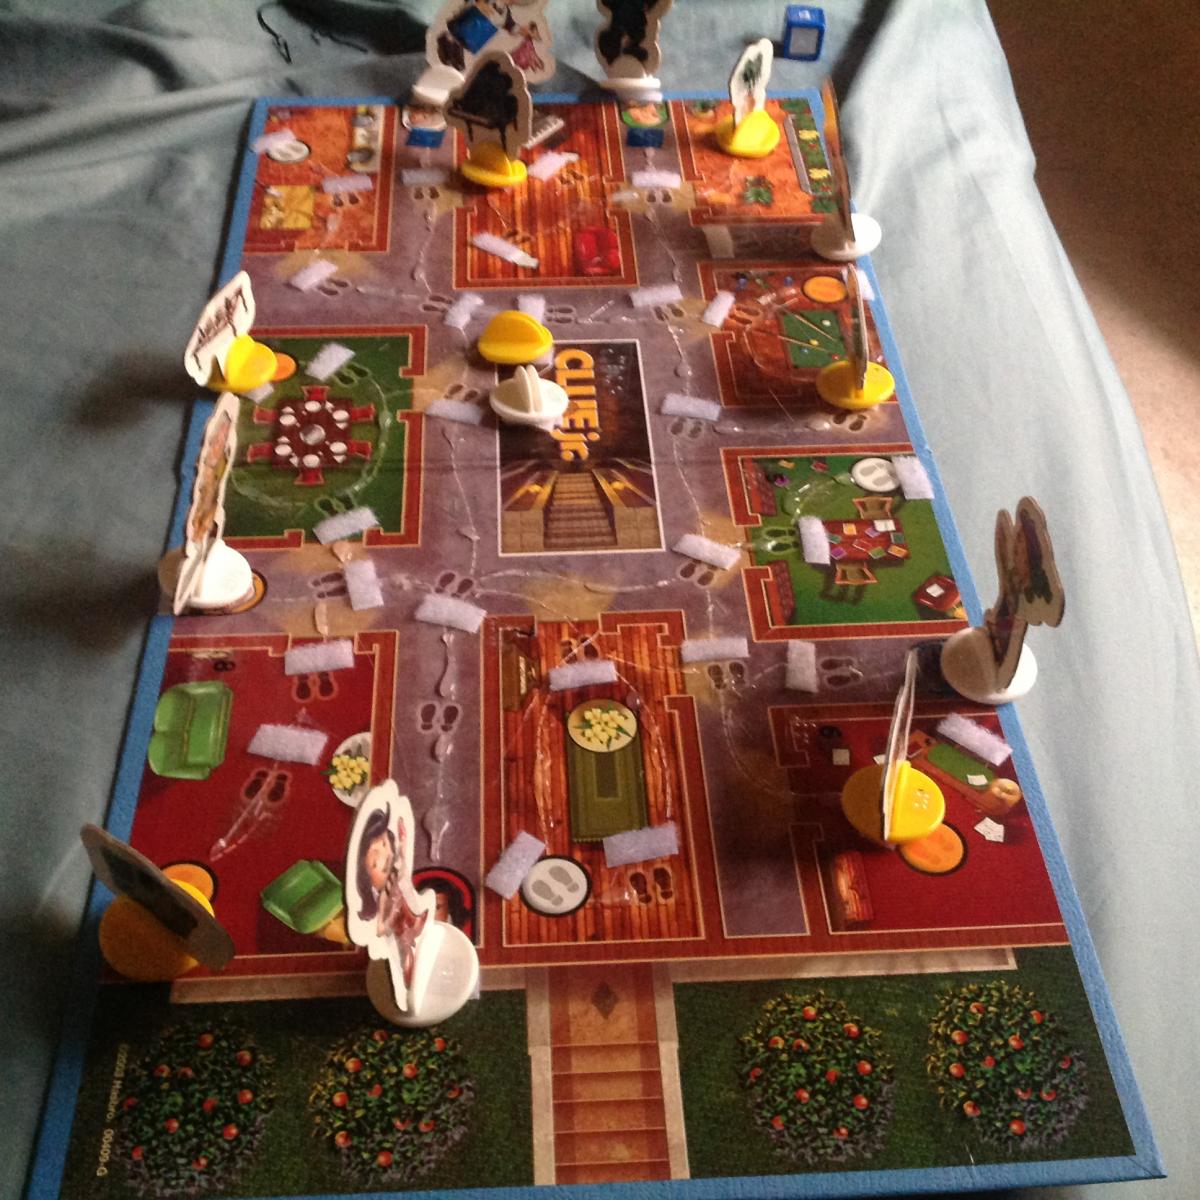 Clue Jr: case of the missing cake. The image is the game set up with the character and furniture pieces on the board. 